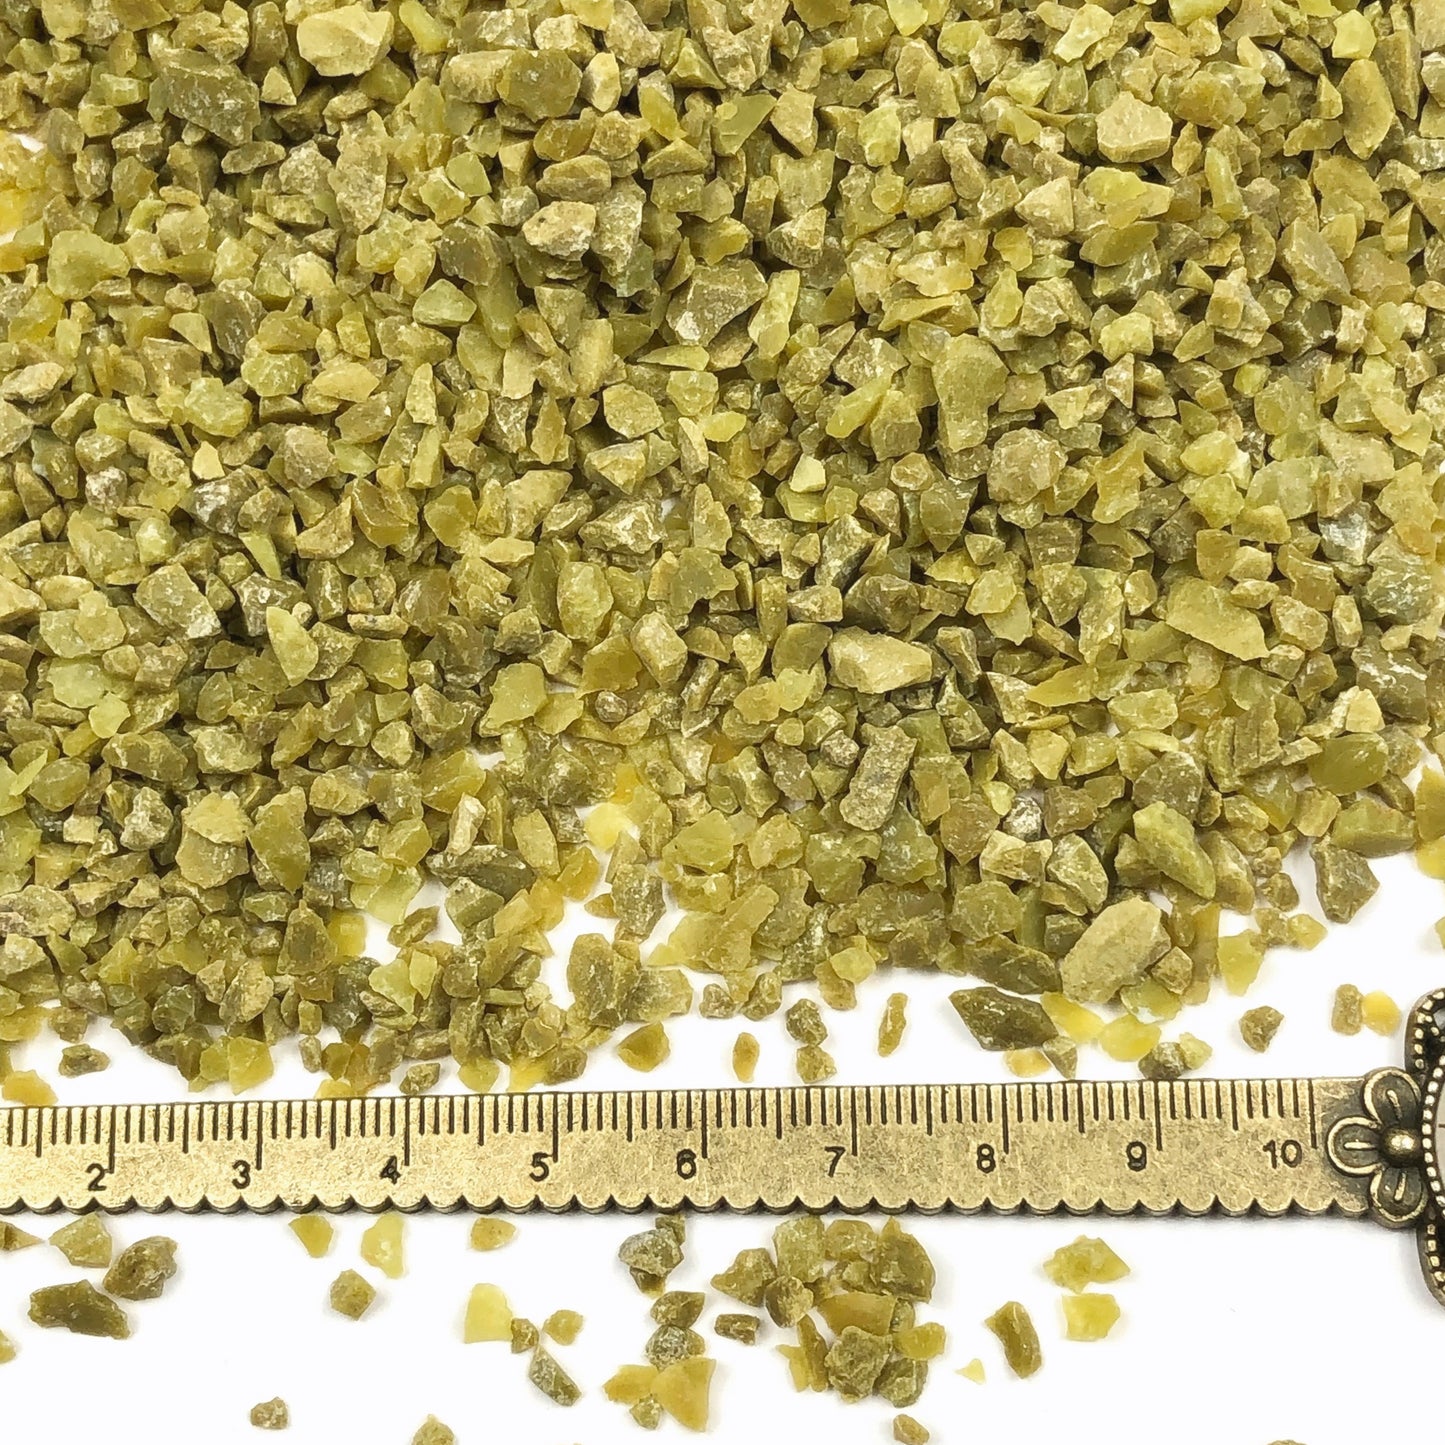 Crushed Olive-Green Opal from Madagascar, Coarse Crush, Gravel Size, 4mm - 2mm